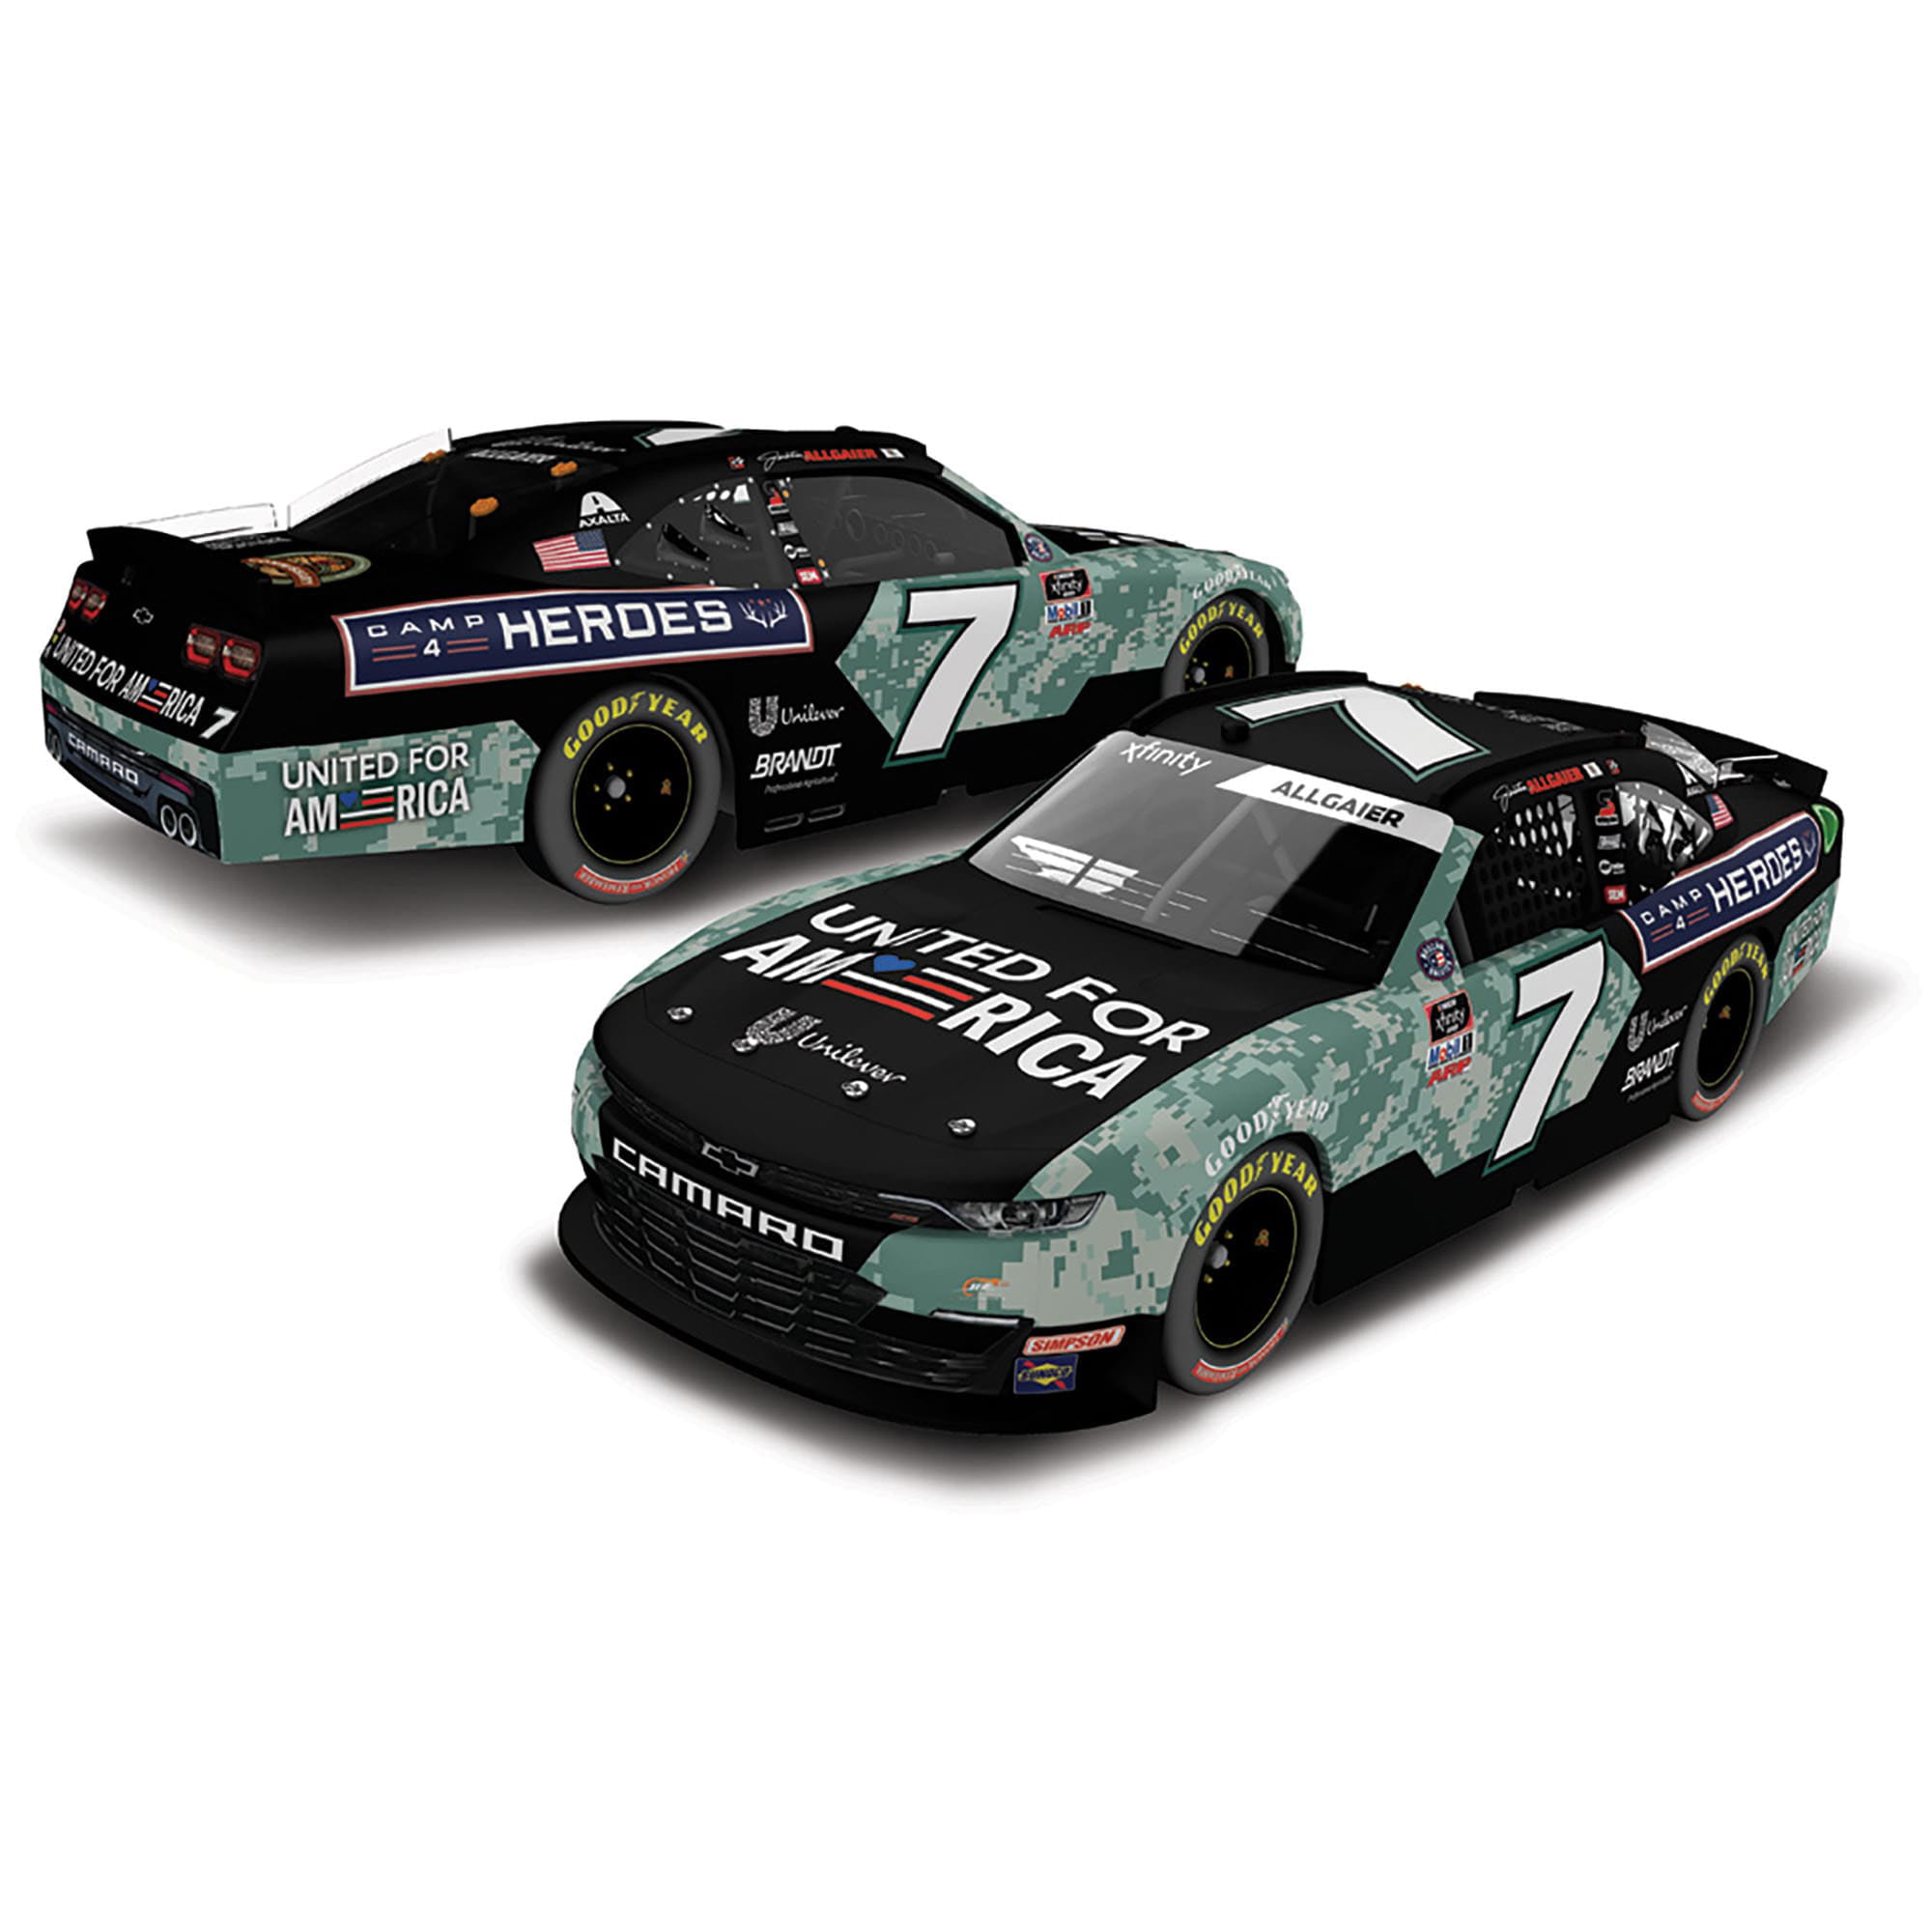 Details about   2020 COLBY HOWARD # 15 Project Hope Foundation 1:24 Diecast 504 Made Free Ship 